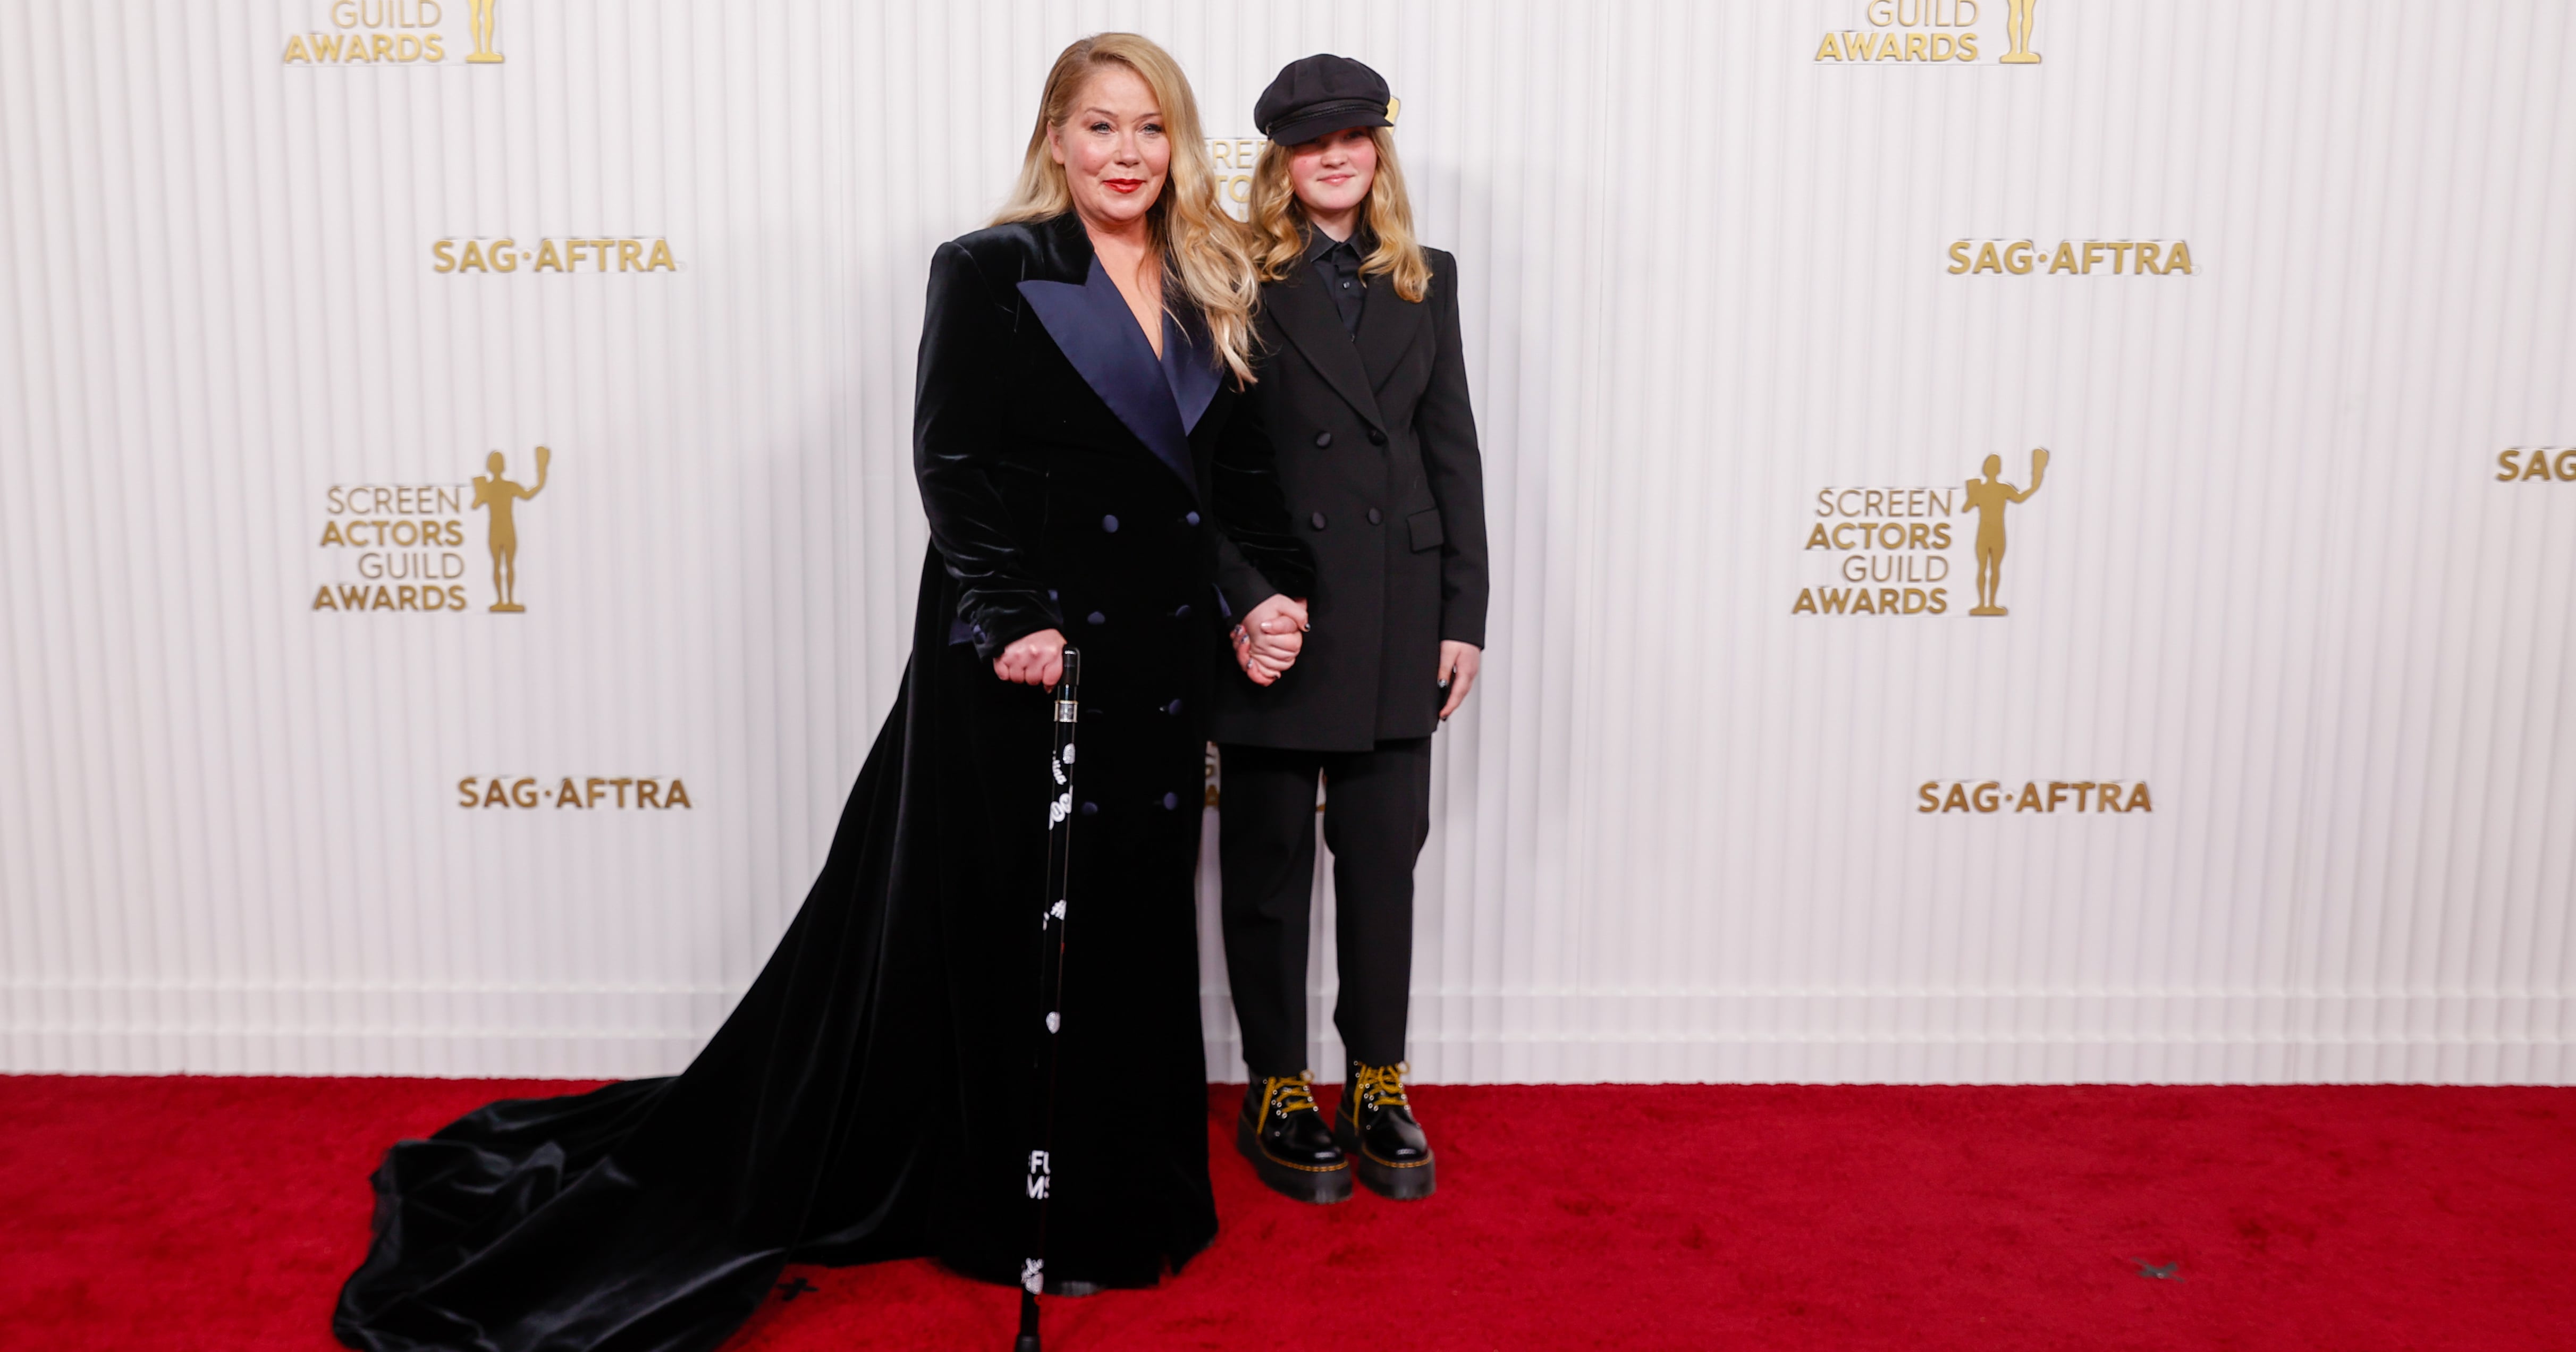 Christina Applegate Has Launched a New “FU MS” Cane Collaboration